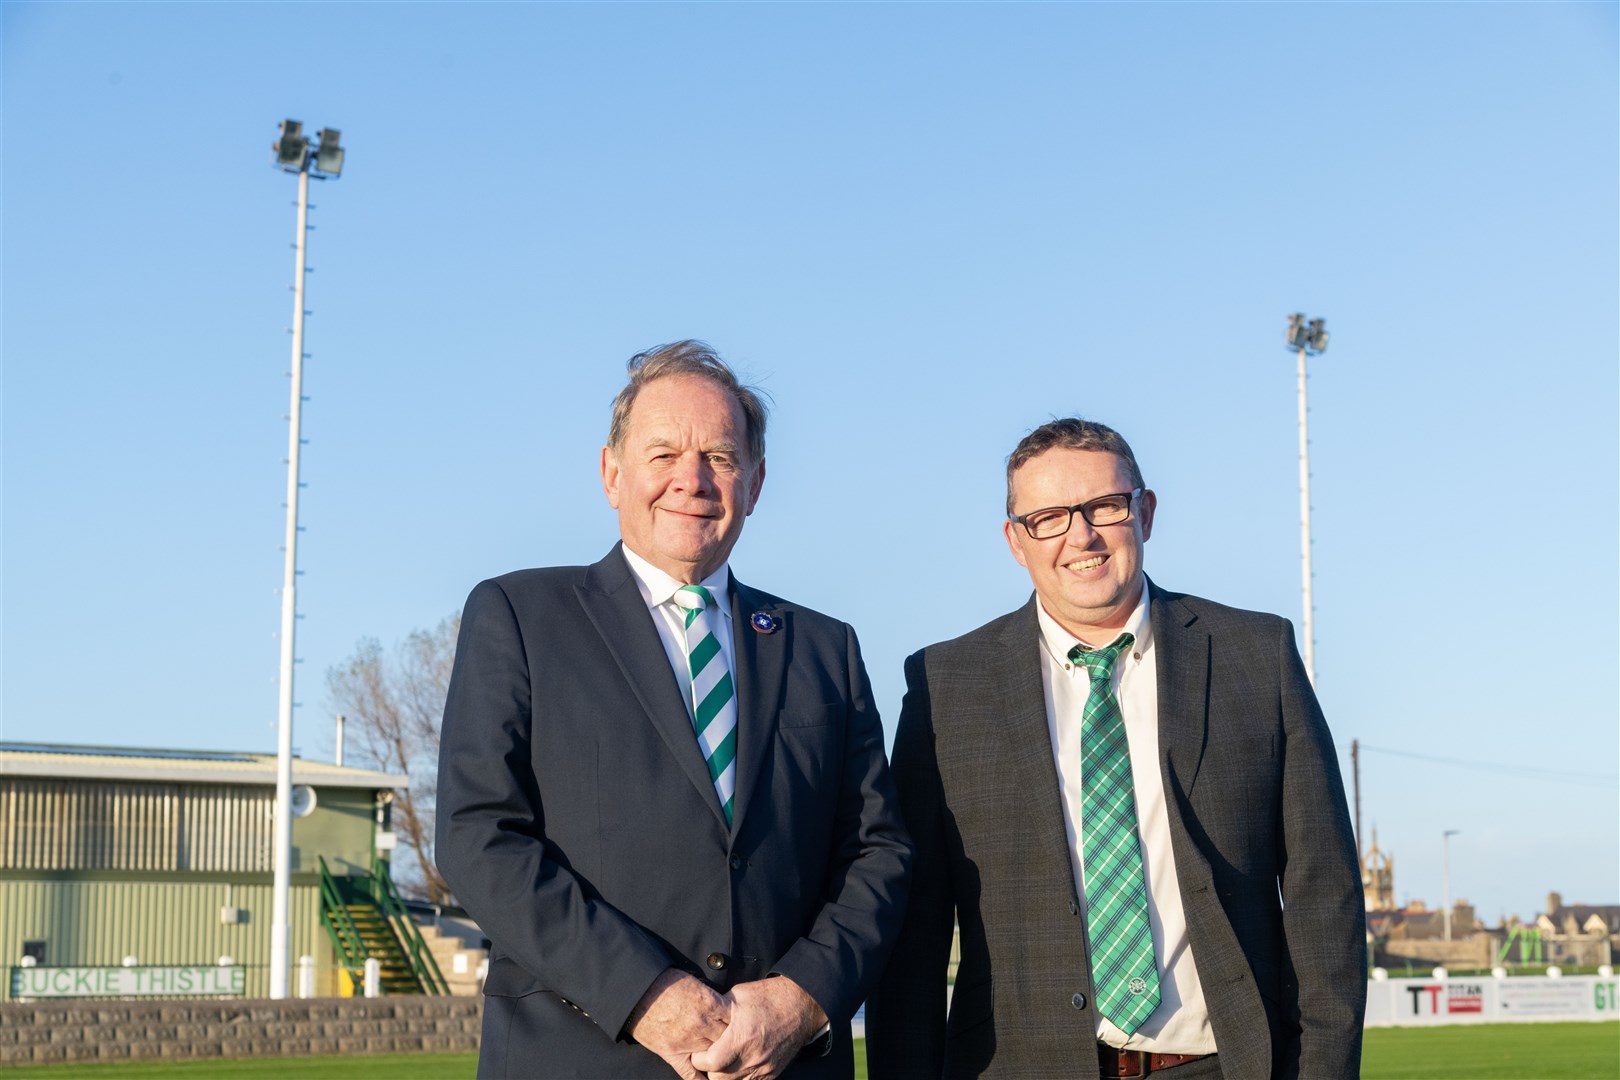 Let there be light! Buckie Thistle Vice President Raymond Cardno (left) and General Manager Stephen Shand celebrate the club's £26,750 award to help fund new LED floodlights. Picture: Beth Taylor